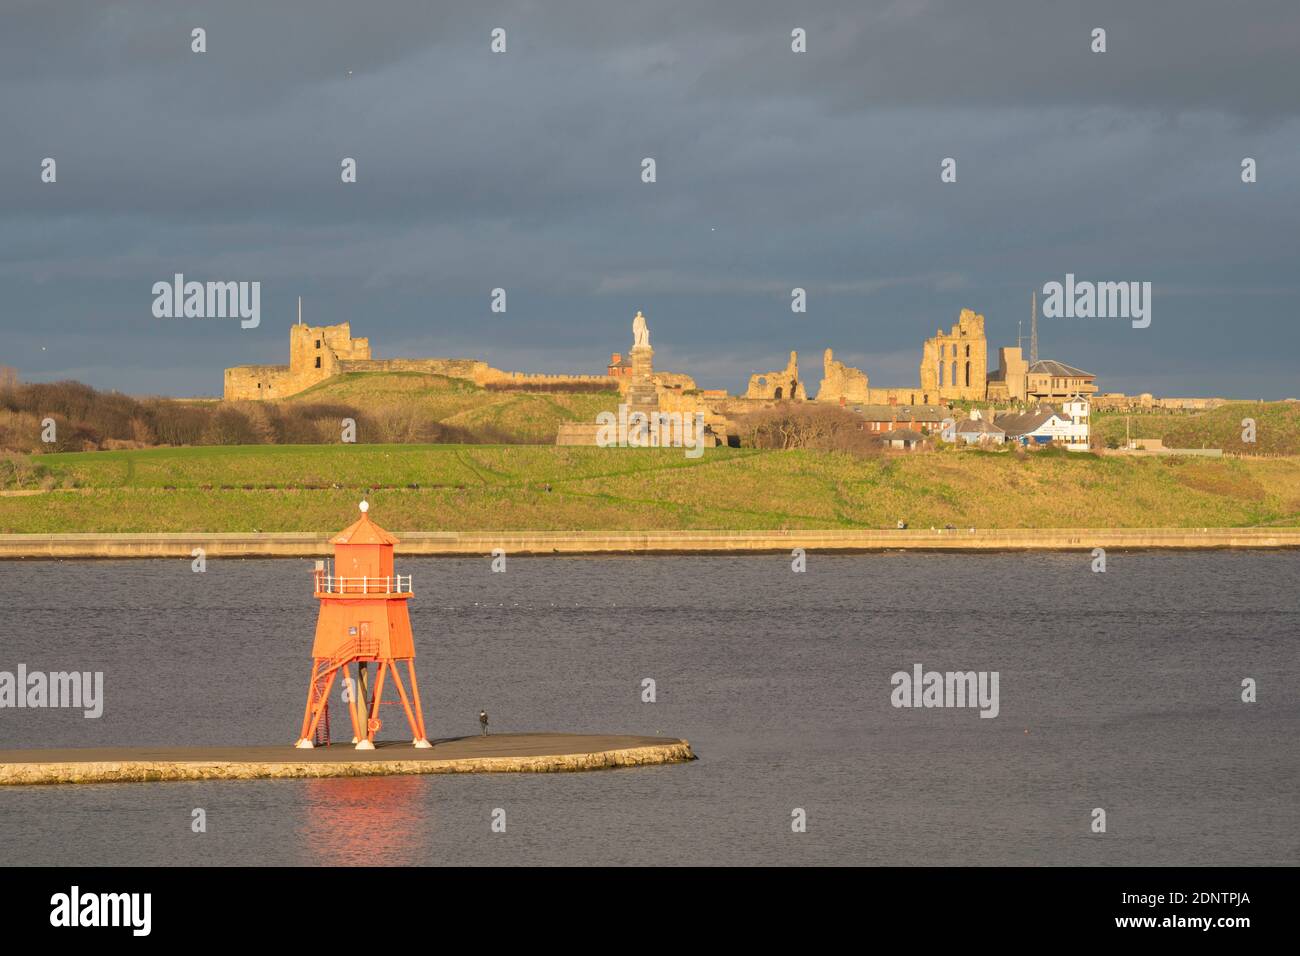 The Herd Groyne lighthouse and Tynemouth castle and priory buildings seen from South Shields, north east England, UK Stock Photo